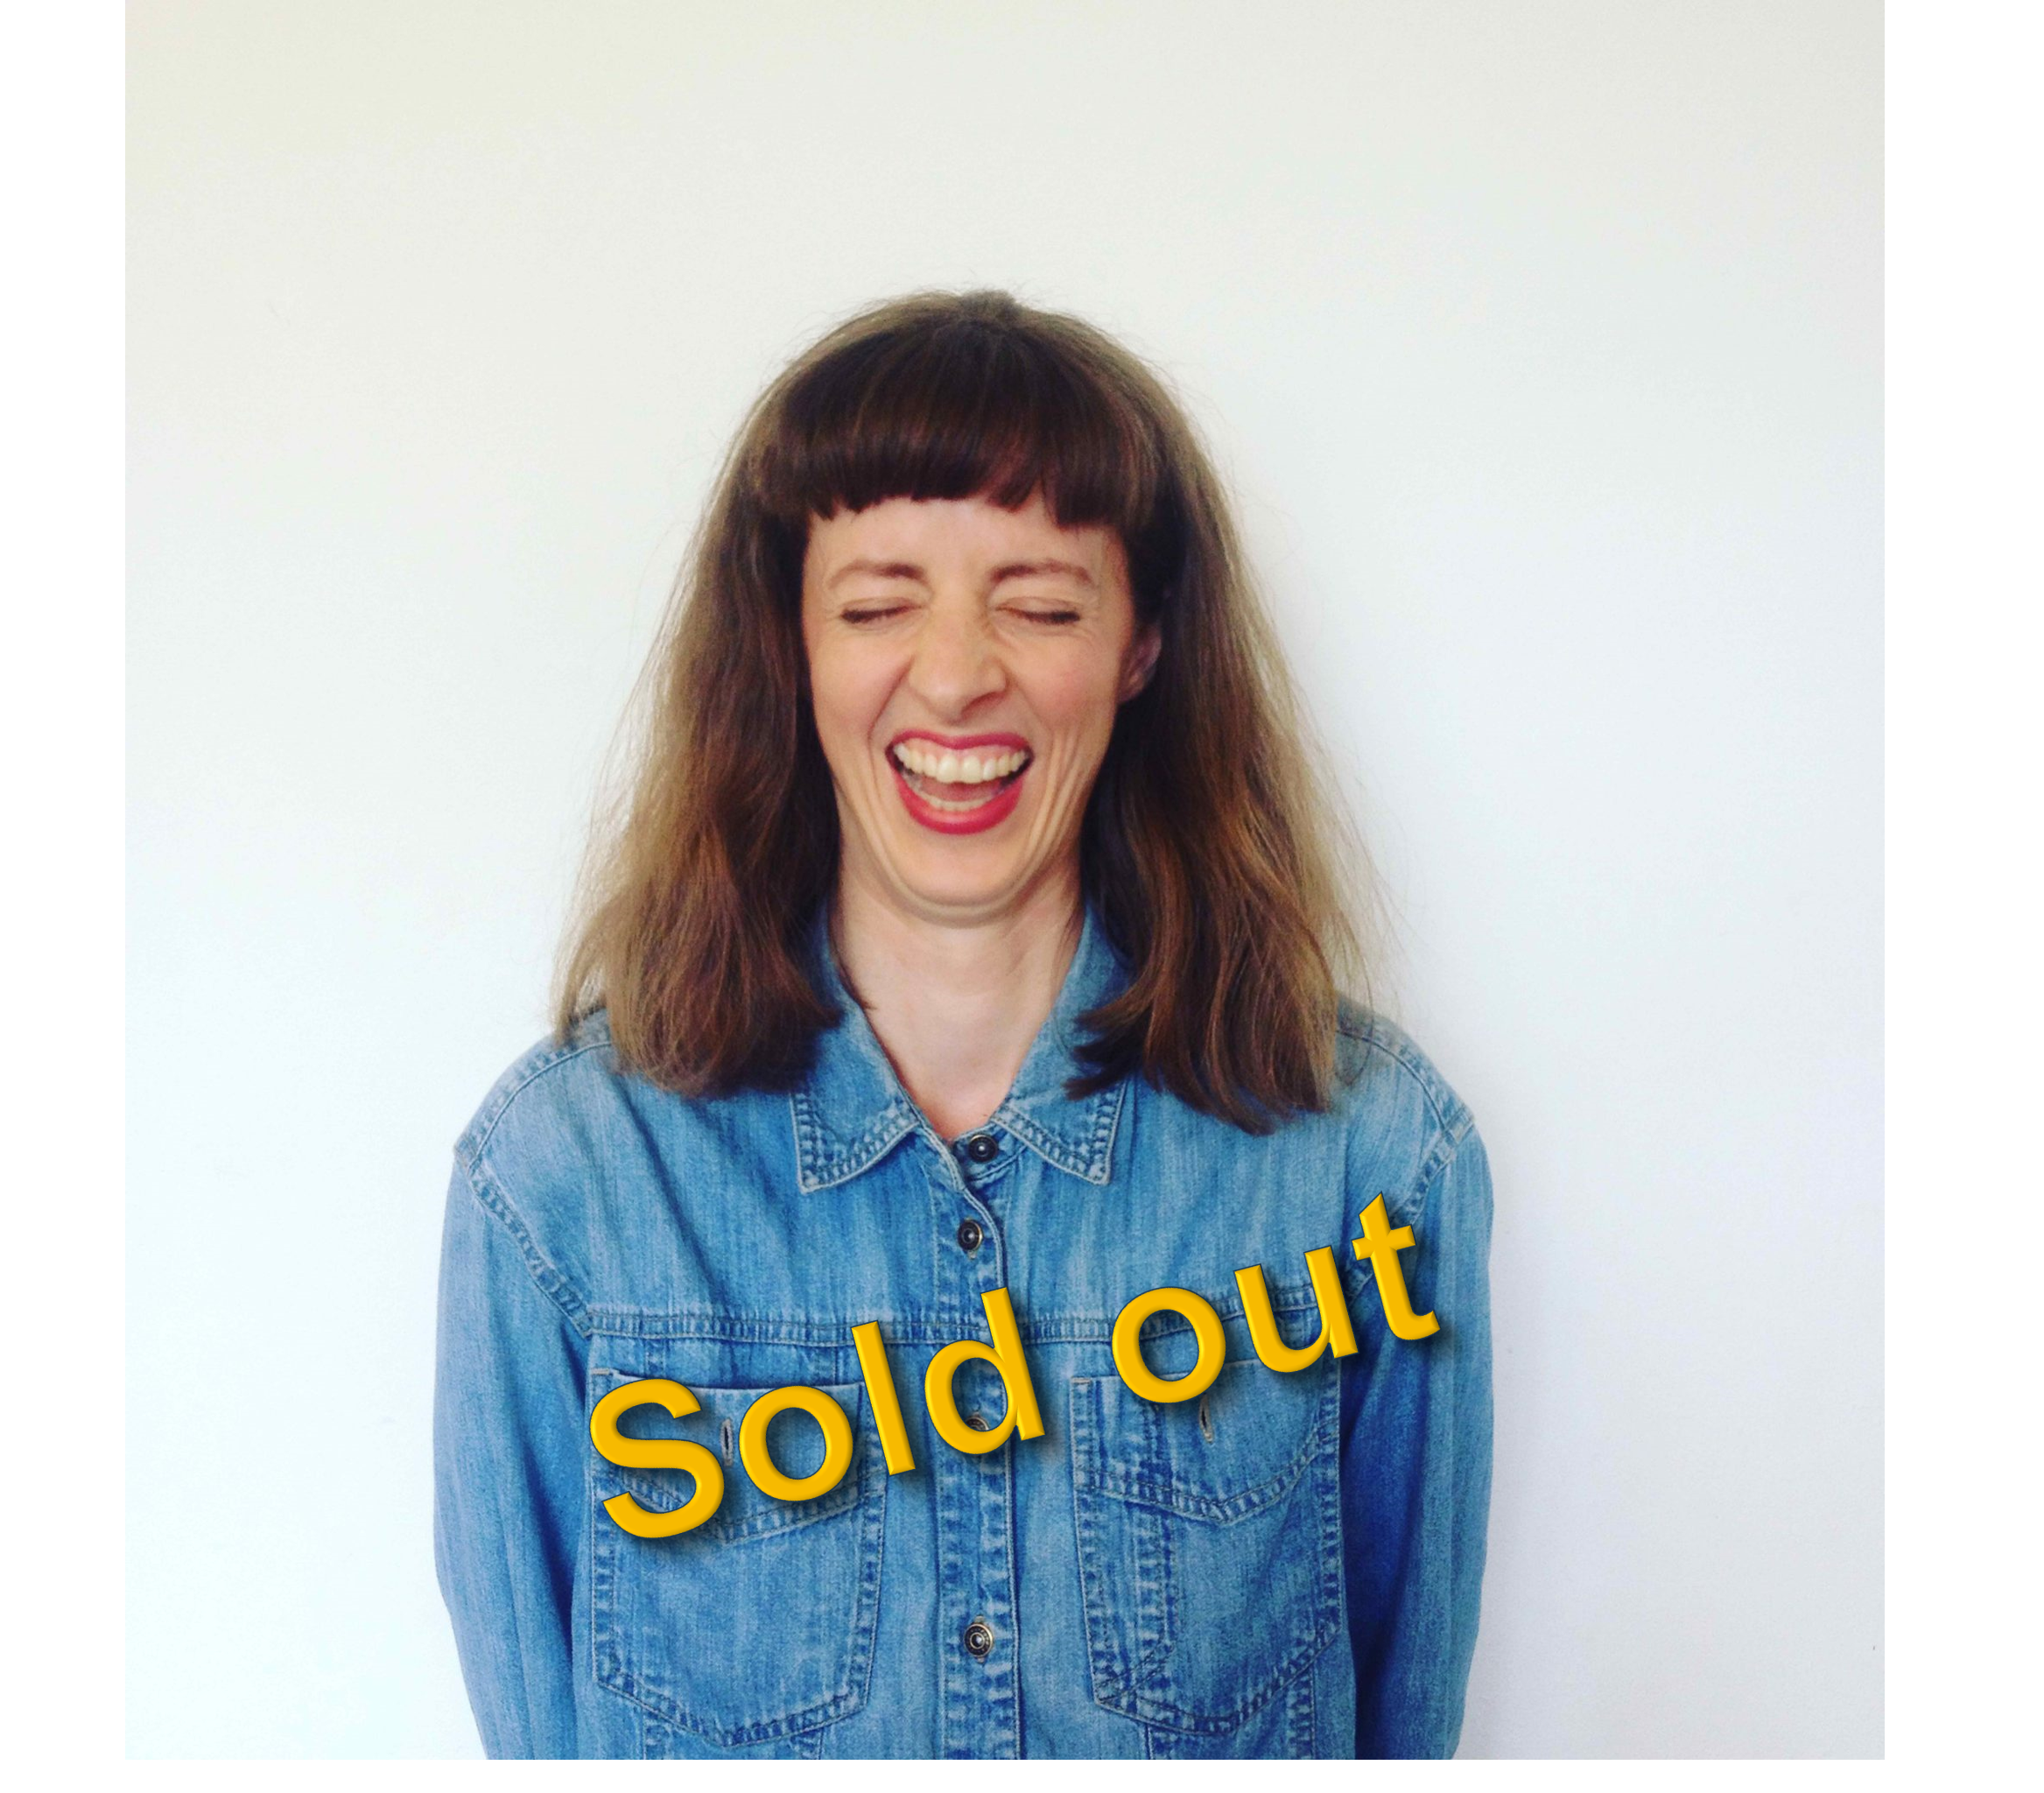 Emily sold out